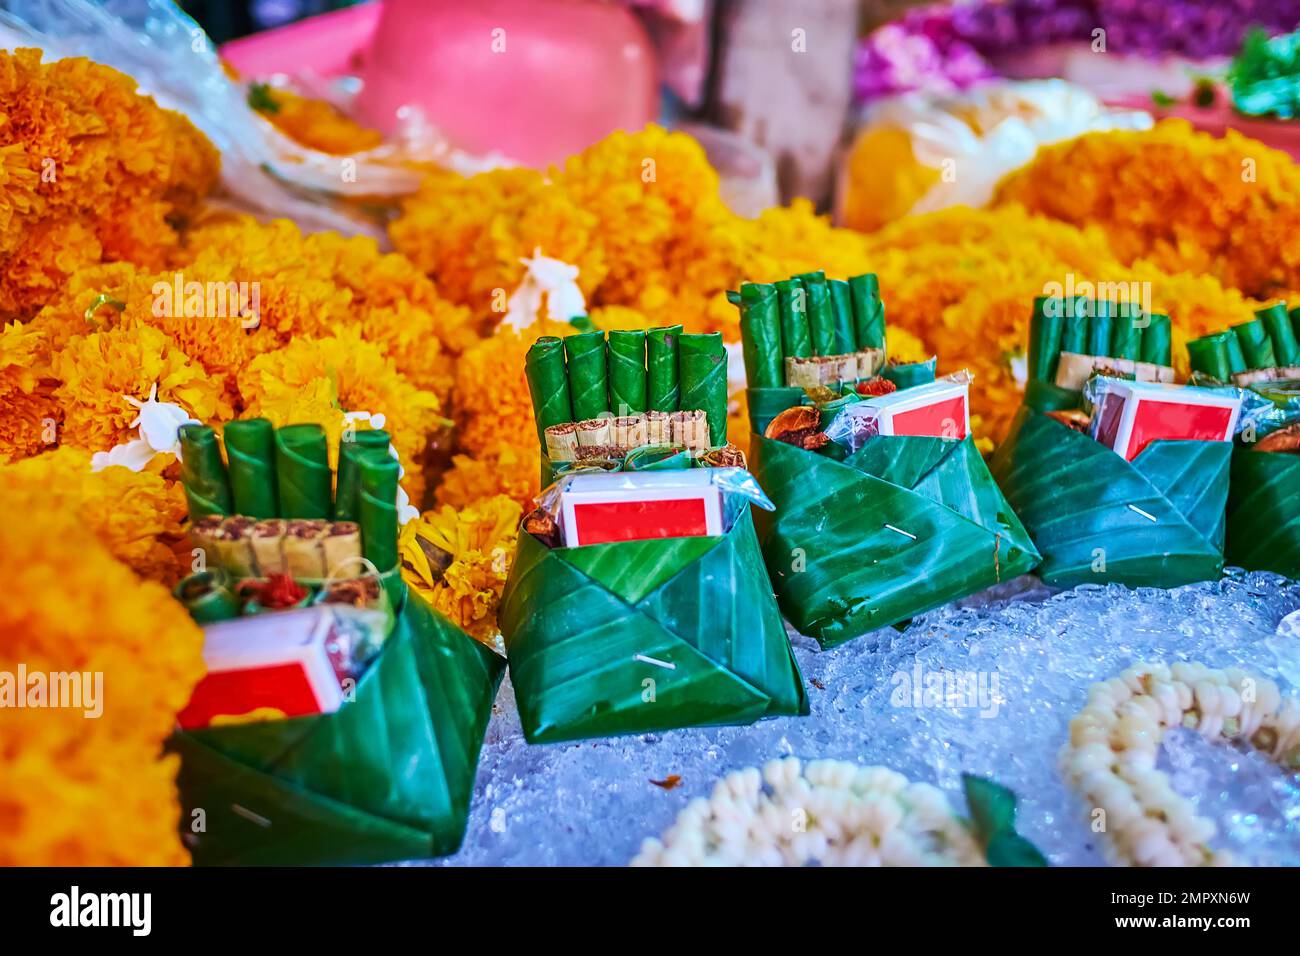 The counter of the stall with bright yellow marigolds and traditional Thai cigars, wrapped in banana leaves, Chiang Mai, Thailand Stock Photo